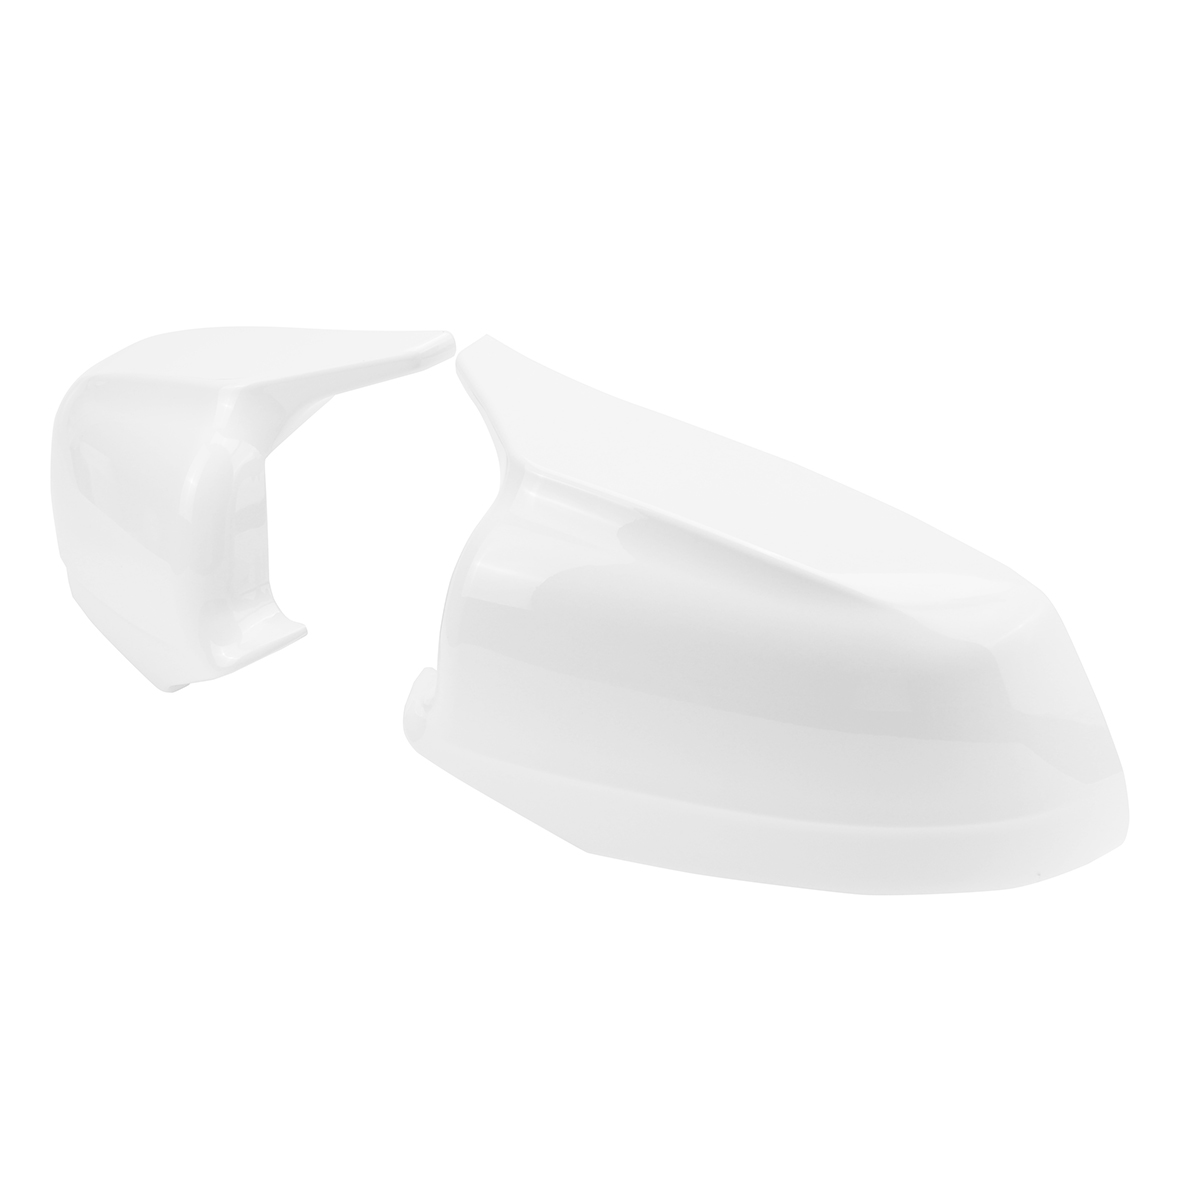 M Style White Rear View Mirror Cap Cover Replacement for BMW F10 F11 F18 2010-2013